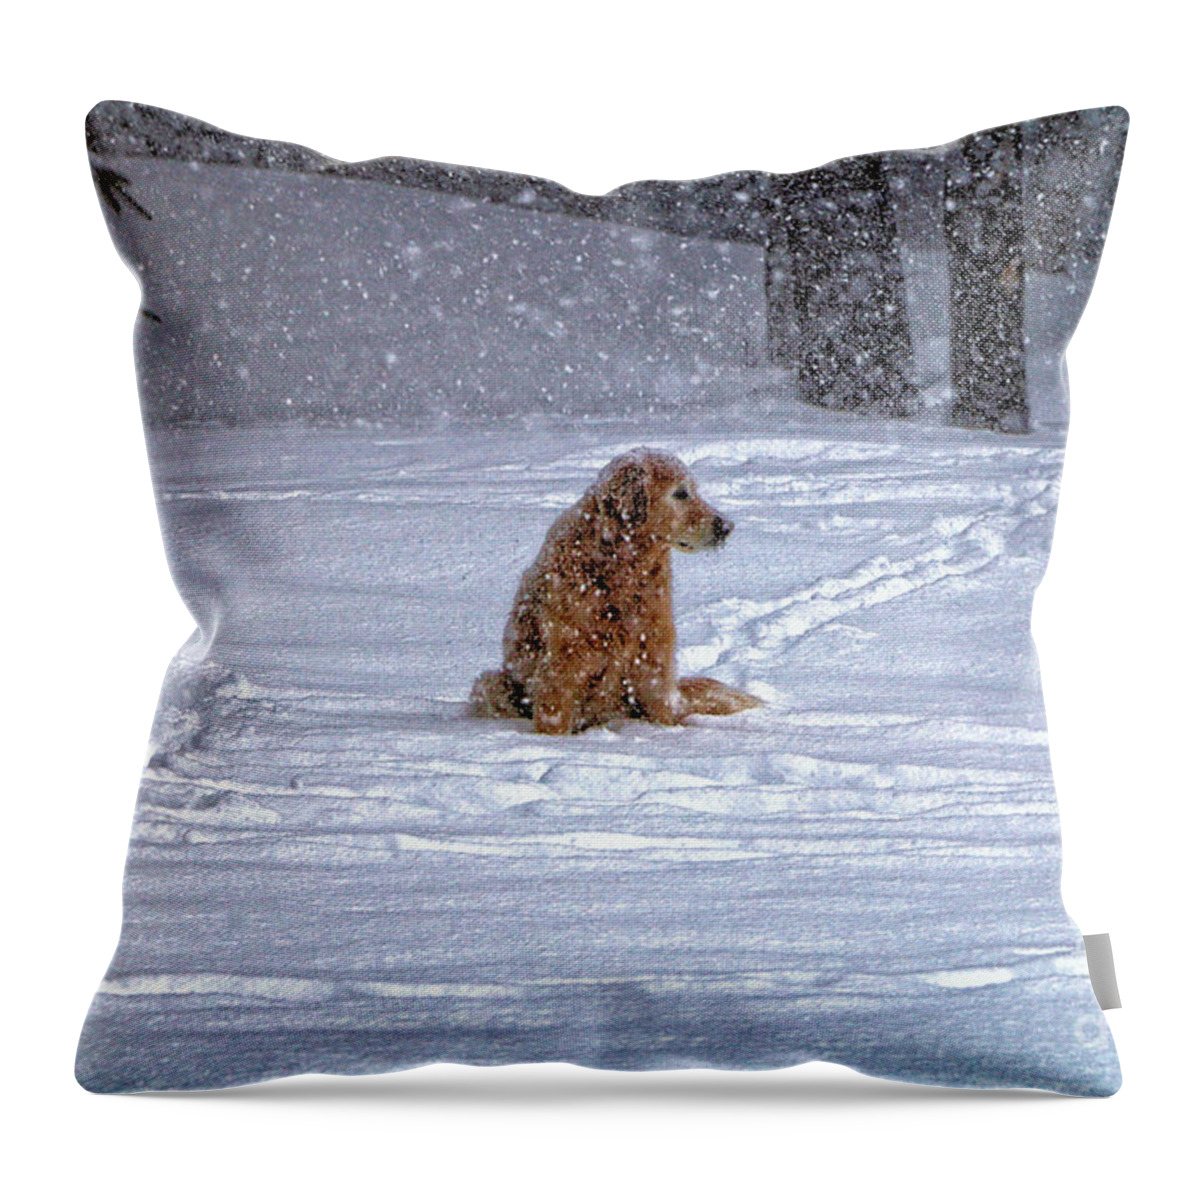 Blizzard Throw Pillow featuring the photograph January Blizzard by Elizabeth Dow